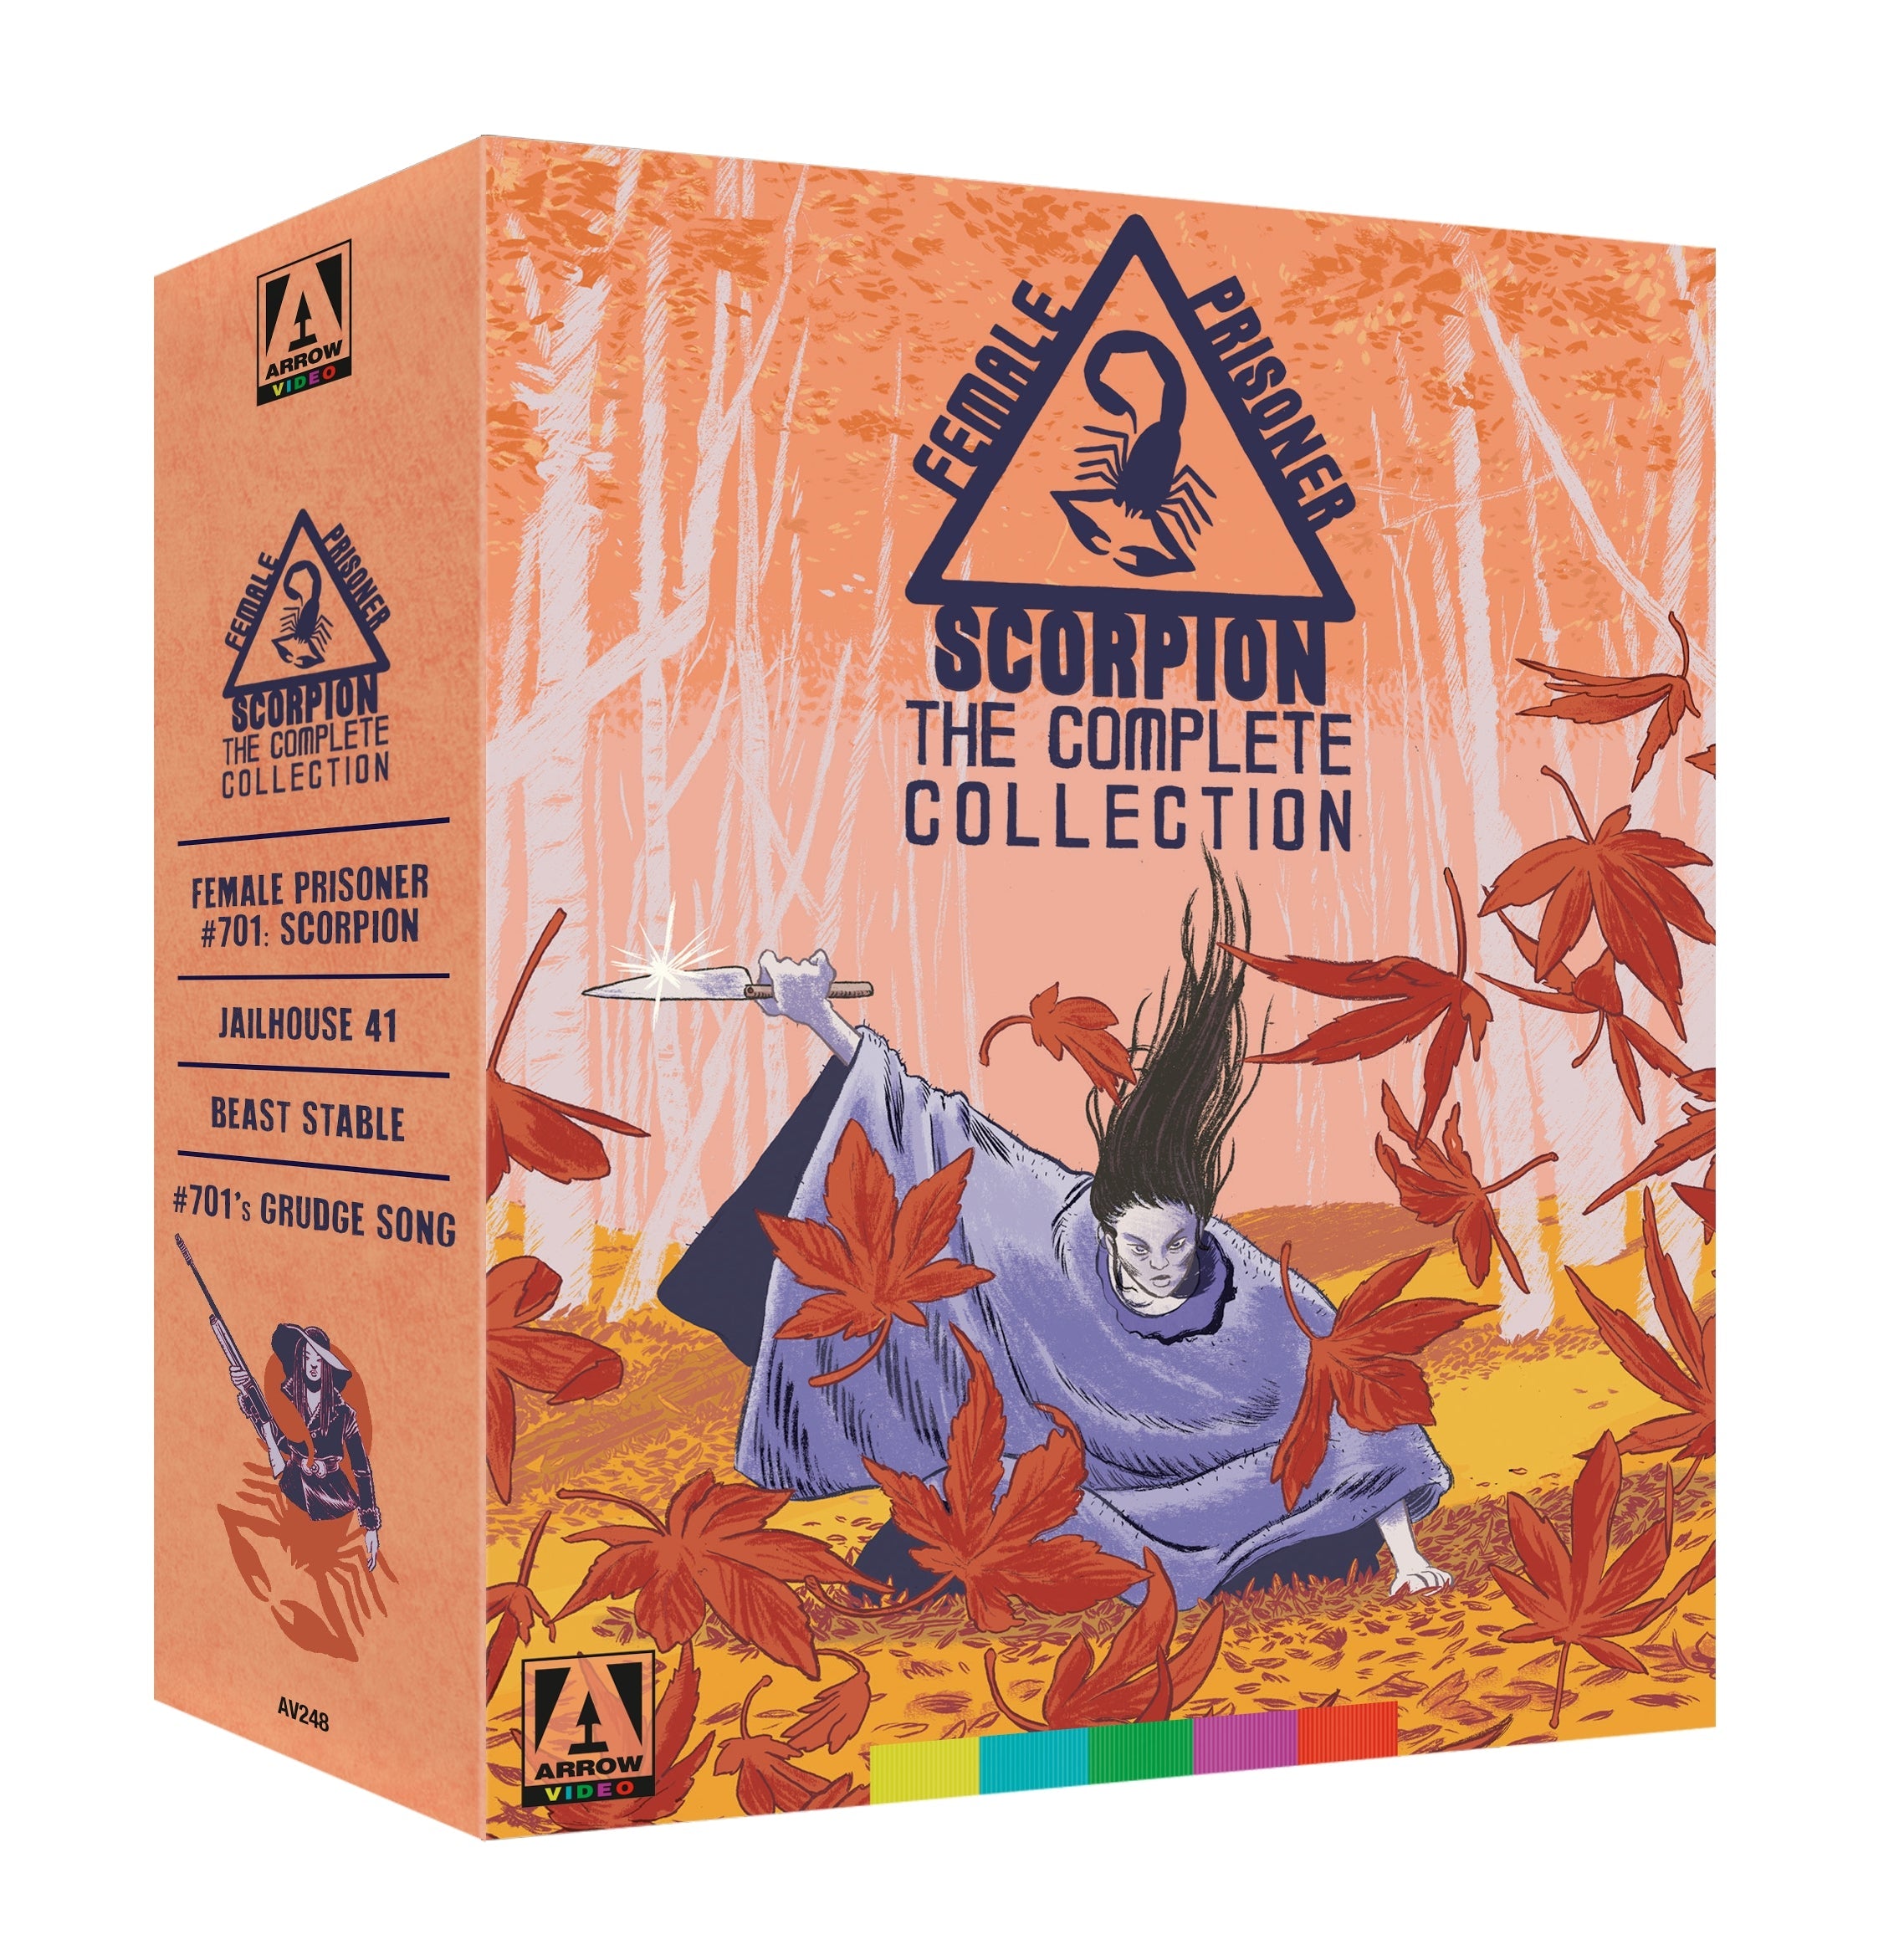 Female Prisoner Scorpion: The Complete Collection Blu-Ray Blu-Ray